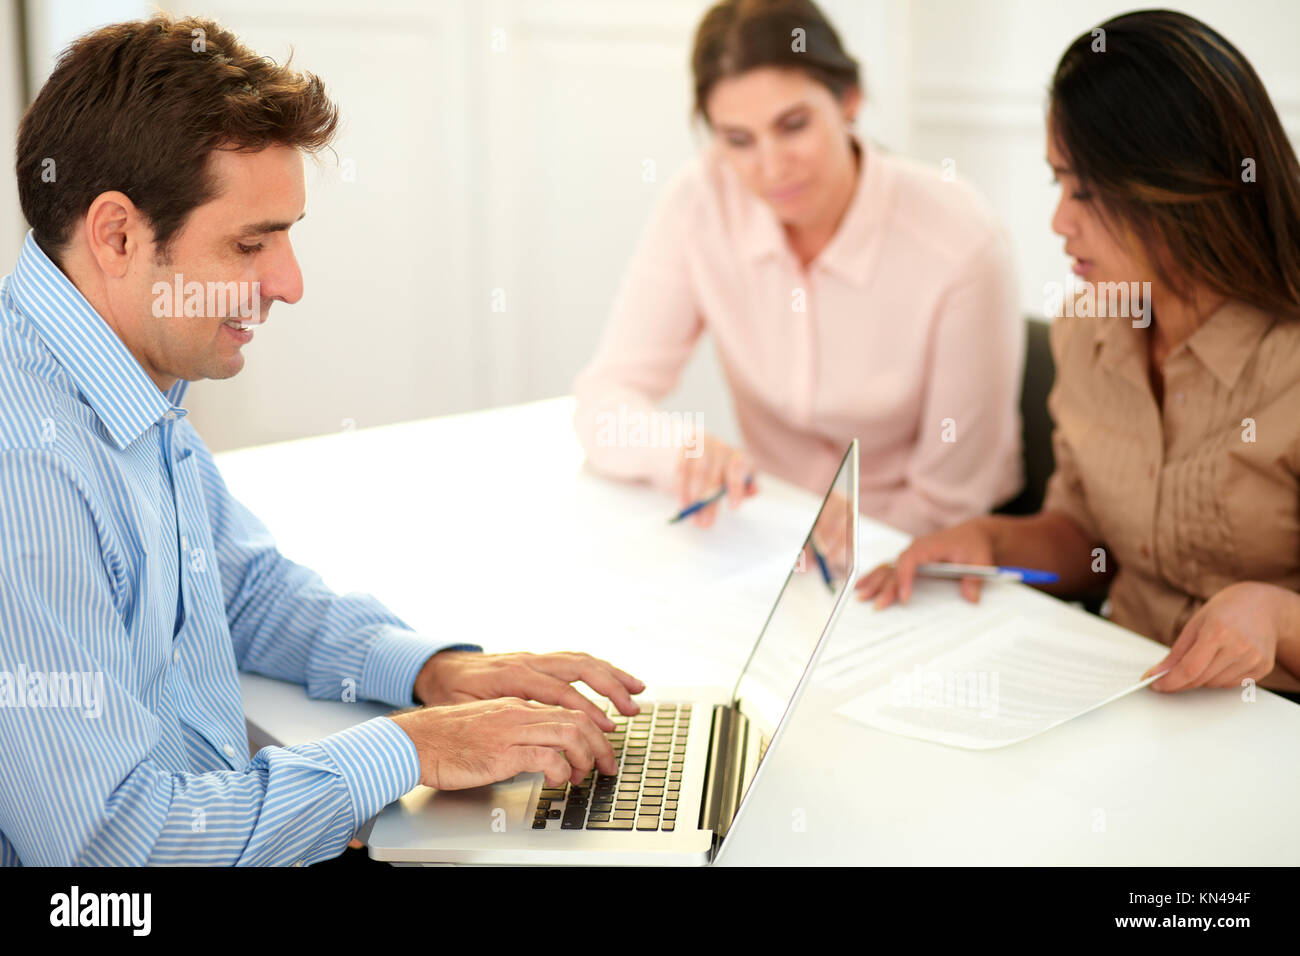 Portrait of adult hispanic businessman using his laptop while sitting in front of caucasian and asiatic women on office desk. Stock Photo